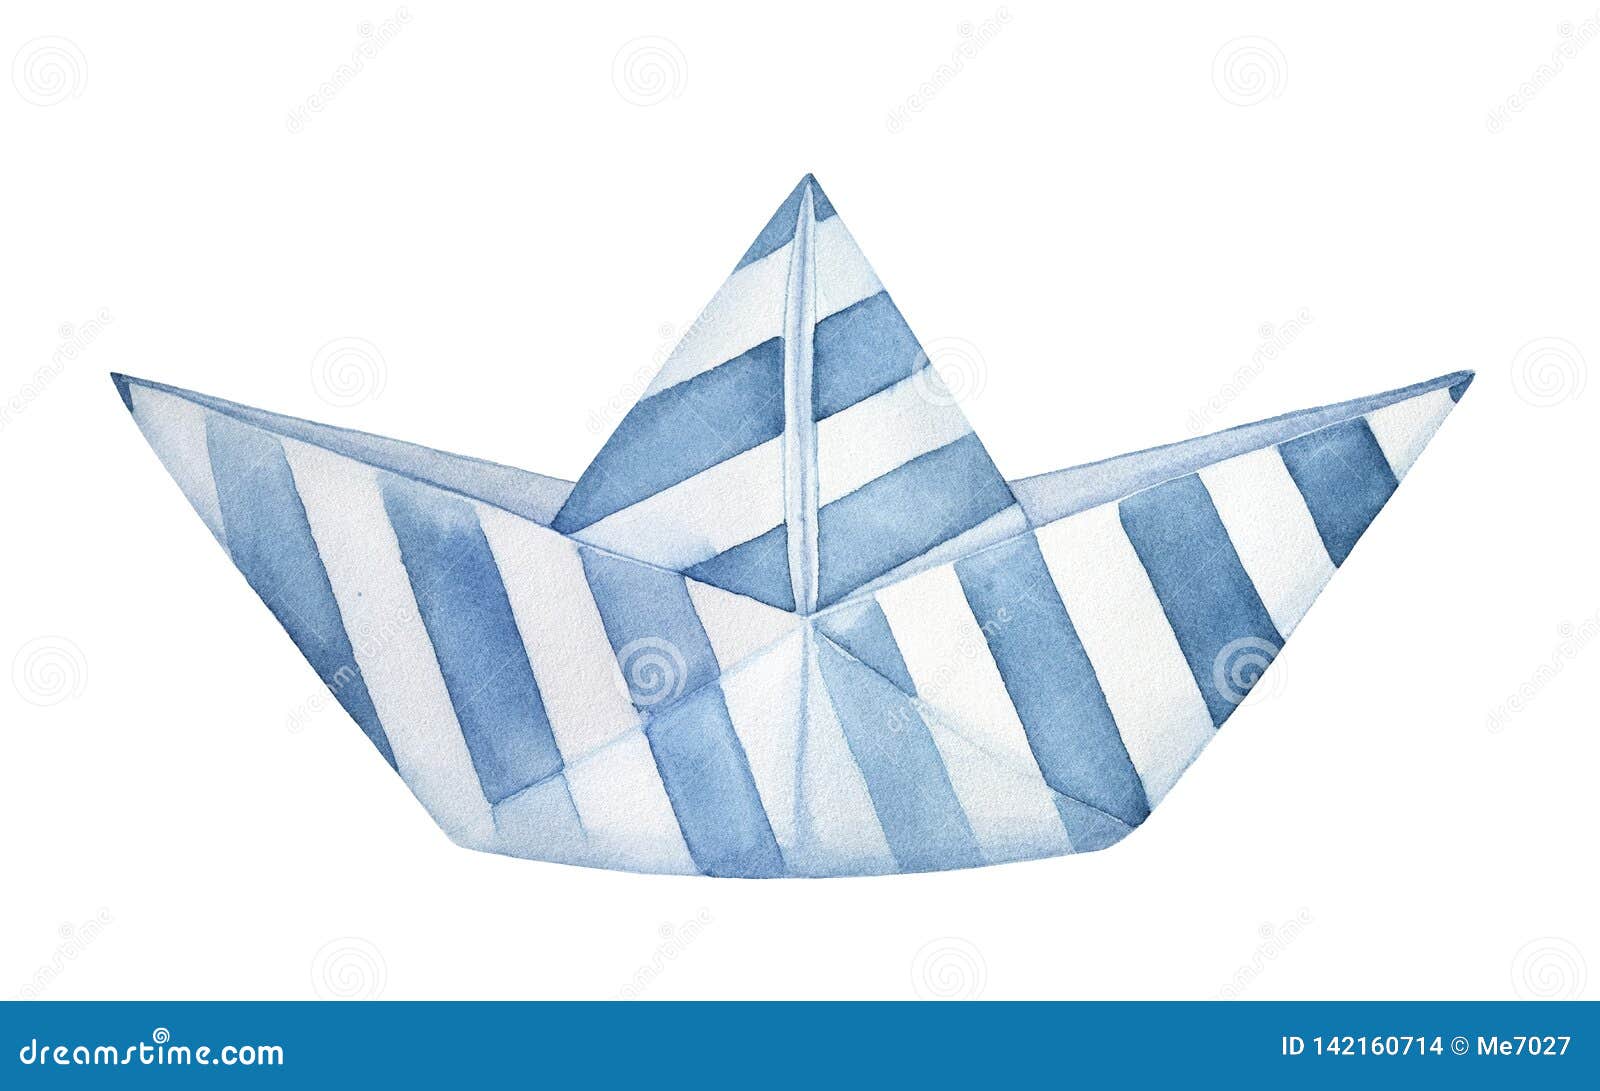 https://thumbs.dreamstime.com/z/little-decorative-folded-paper-boat-decorated-blue-stripes-pattern-hand-painted-watercolour-graphic-drawing-white-backdrop-142160714.jpg